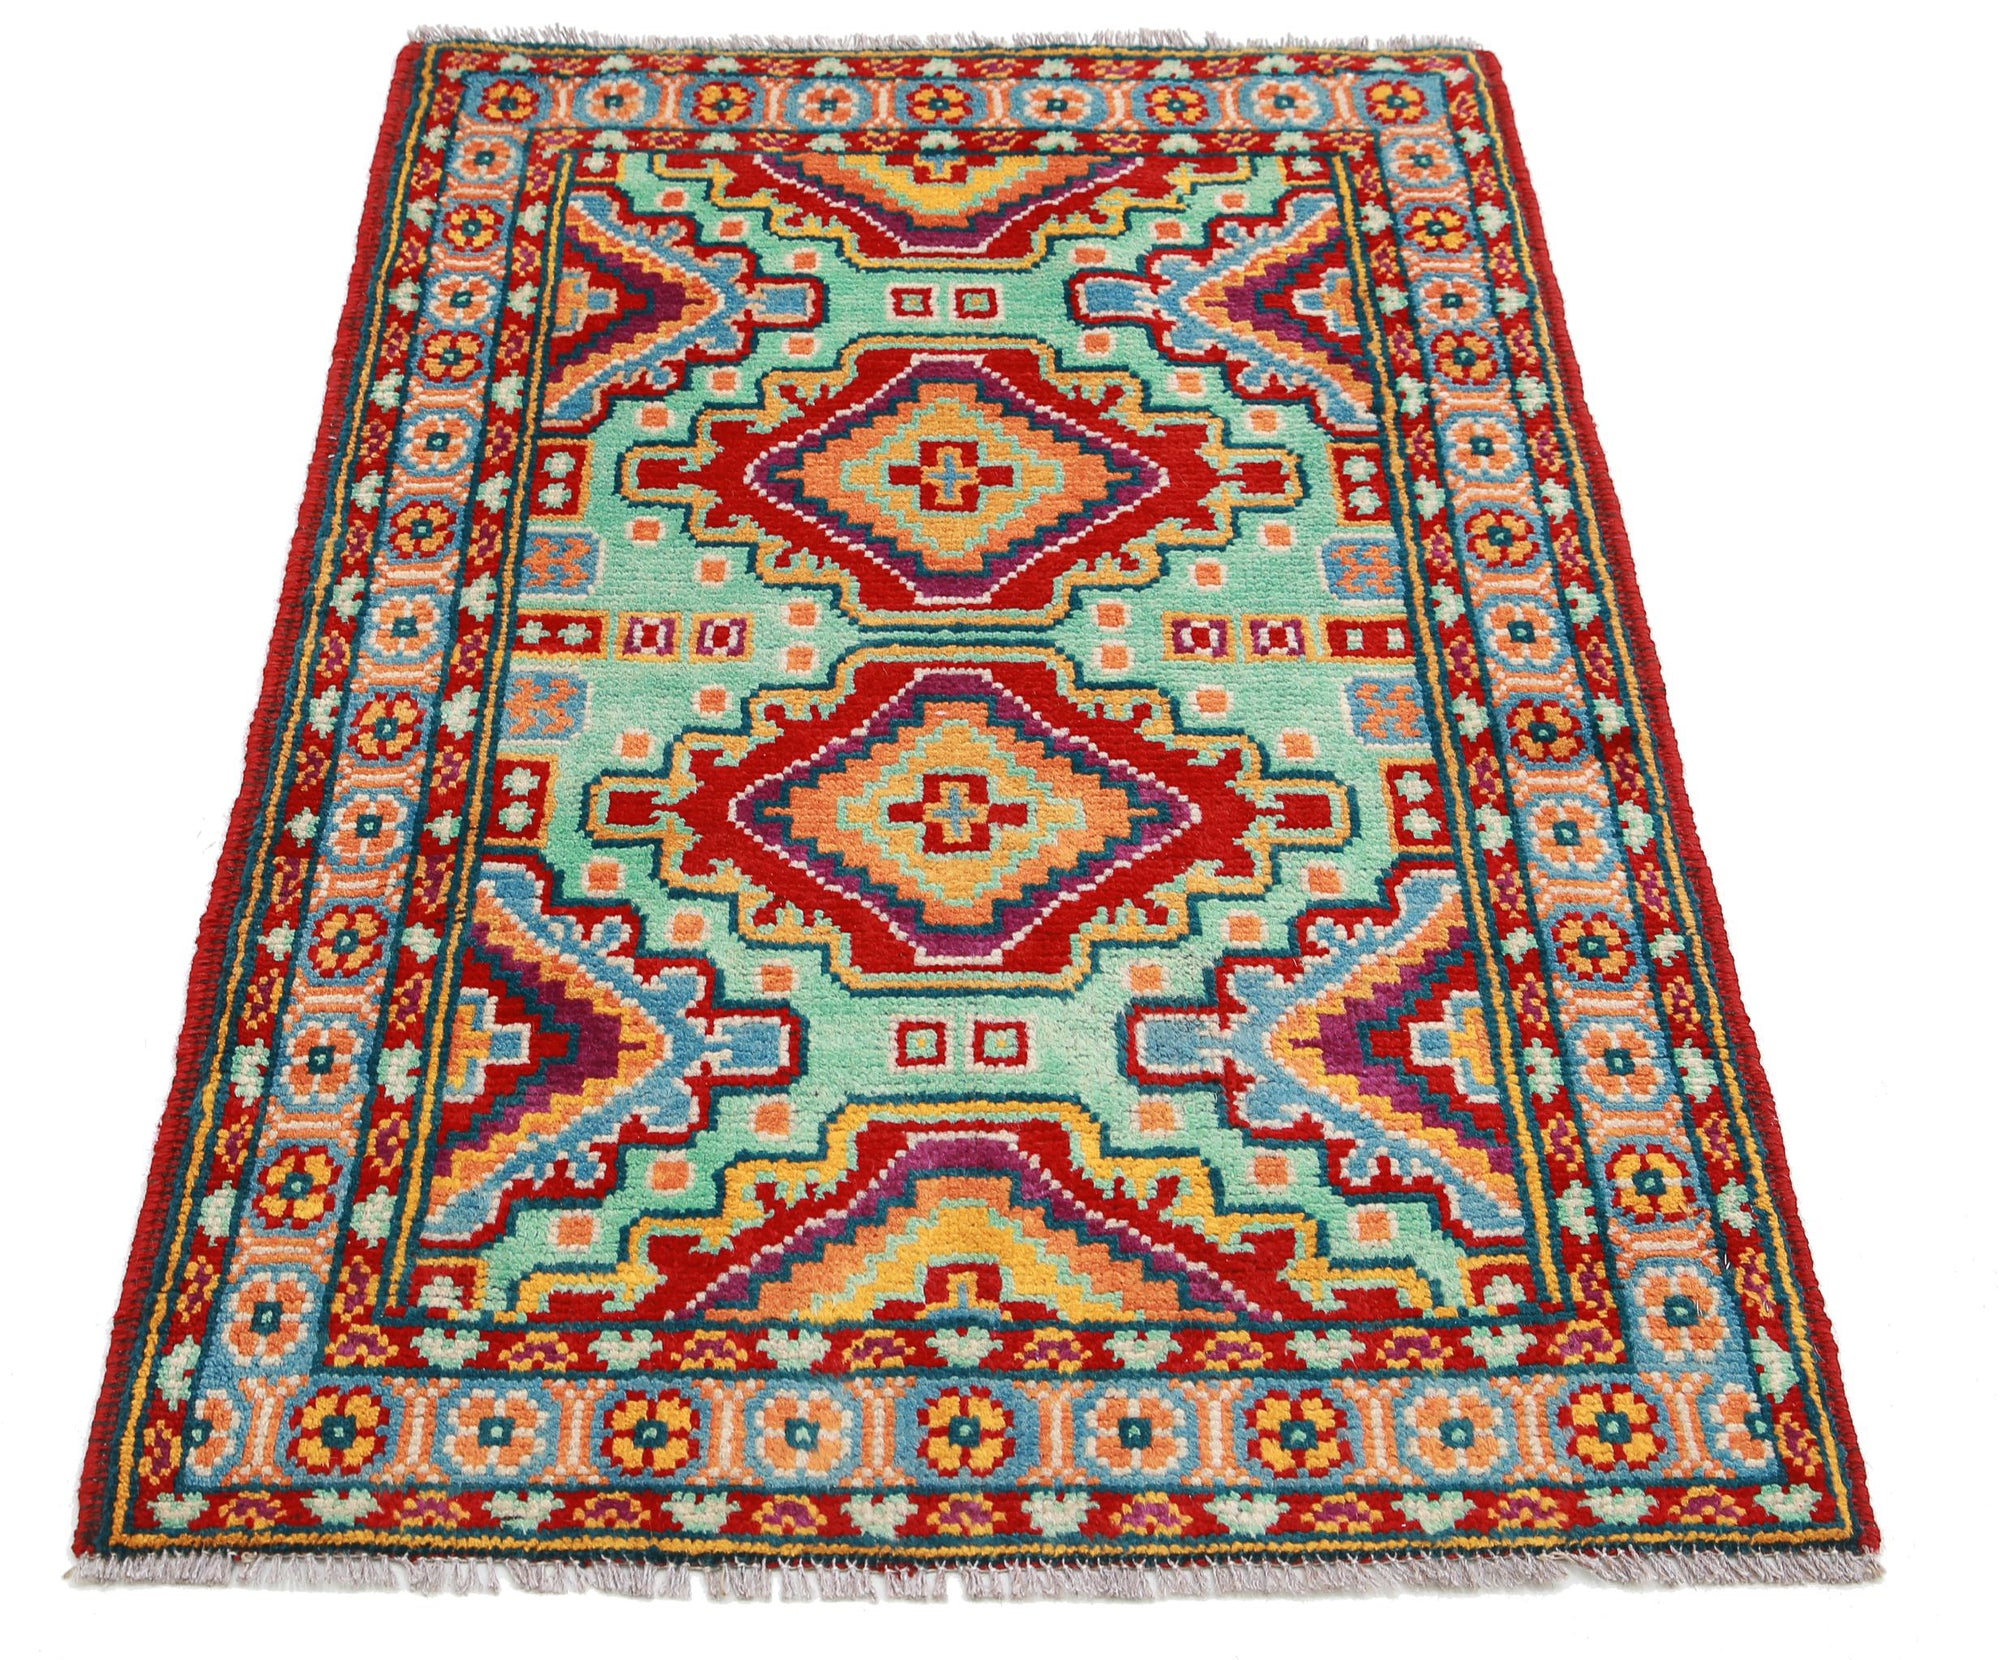 Revival-hand-knotted-qarghani-wool-rug-5014196-3.jpg